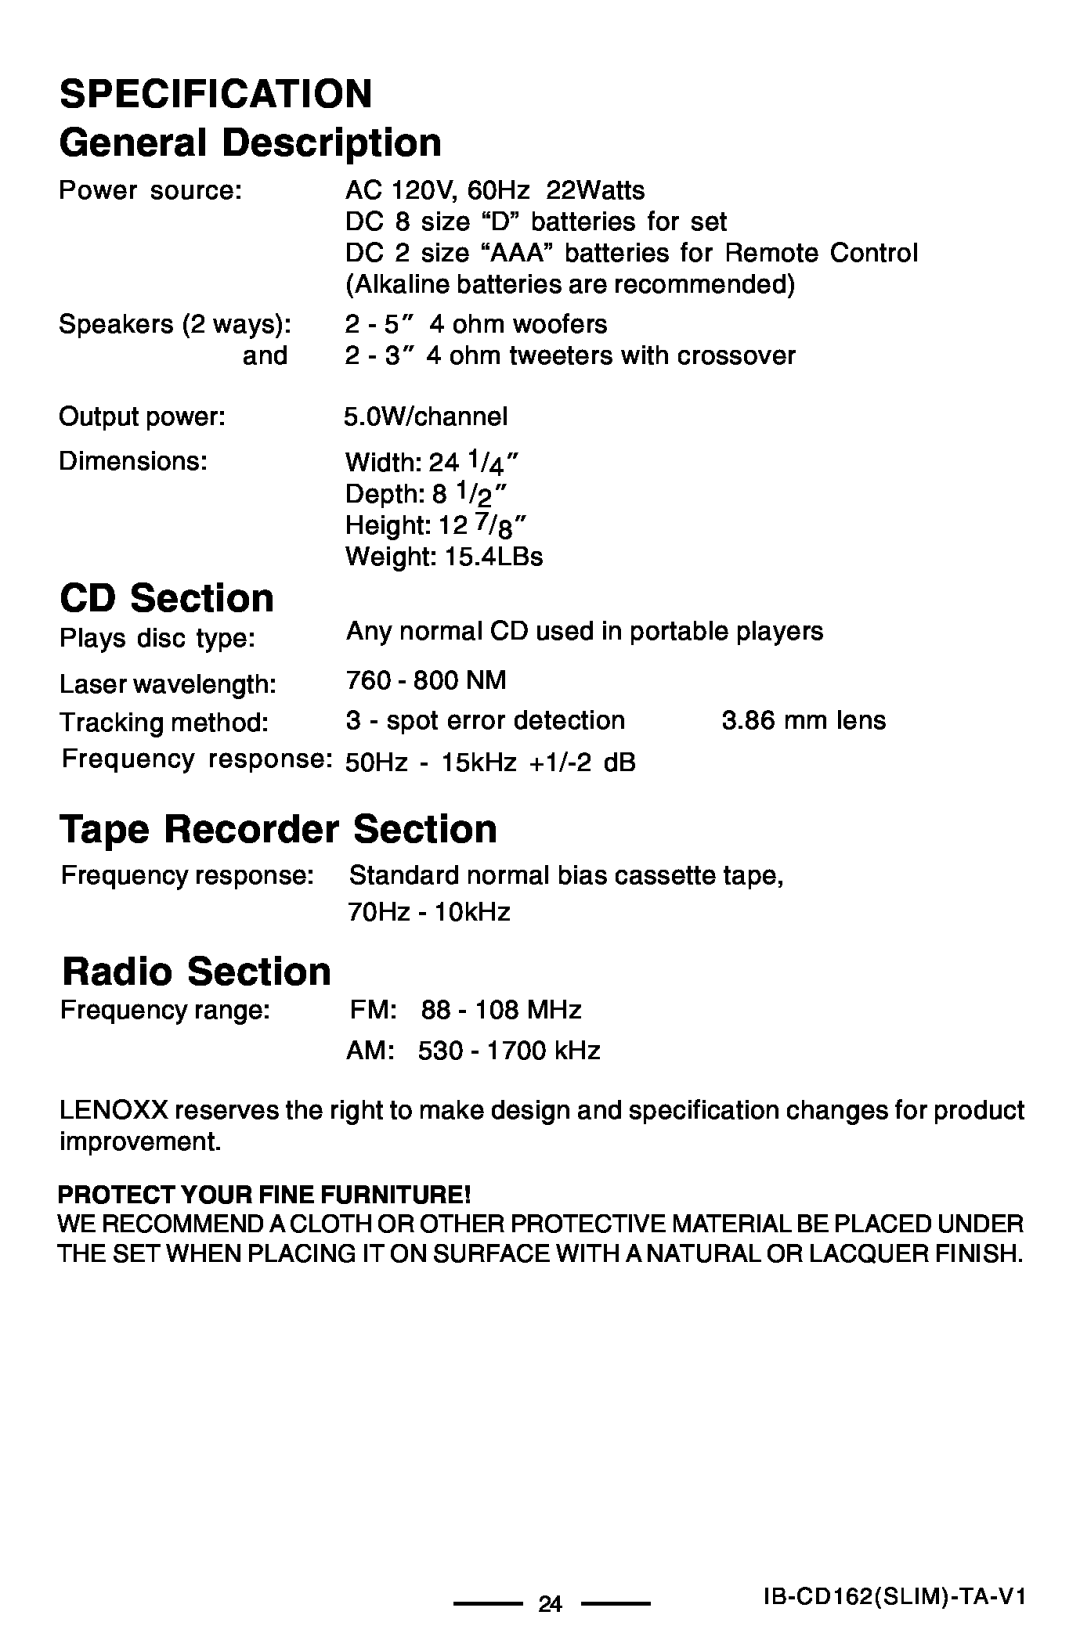 Lenoxx Electronics CD-162 SPECIFICATION General Description, CD Section, Tape Recorder Section, Radio Section 